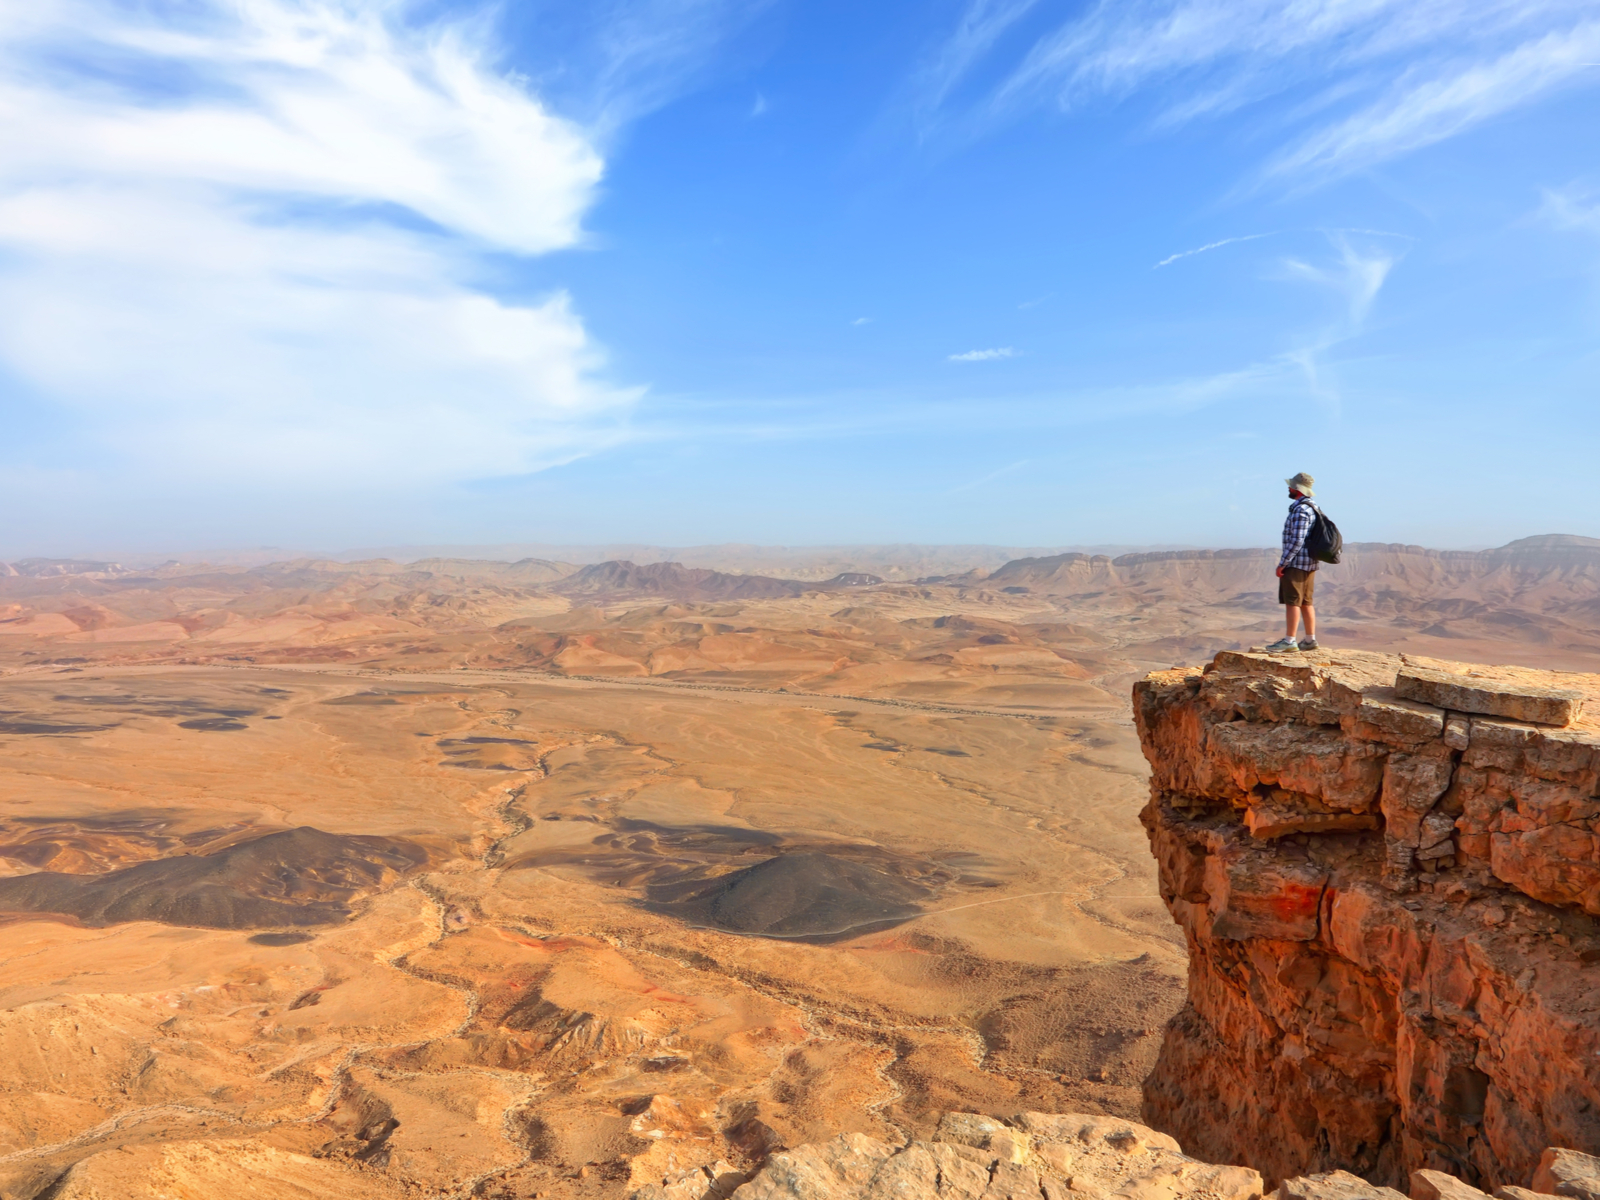 Lone hiker standing on the edge of a mountain in the Negev desert during the best time to visit Israel